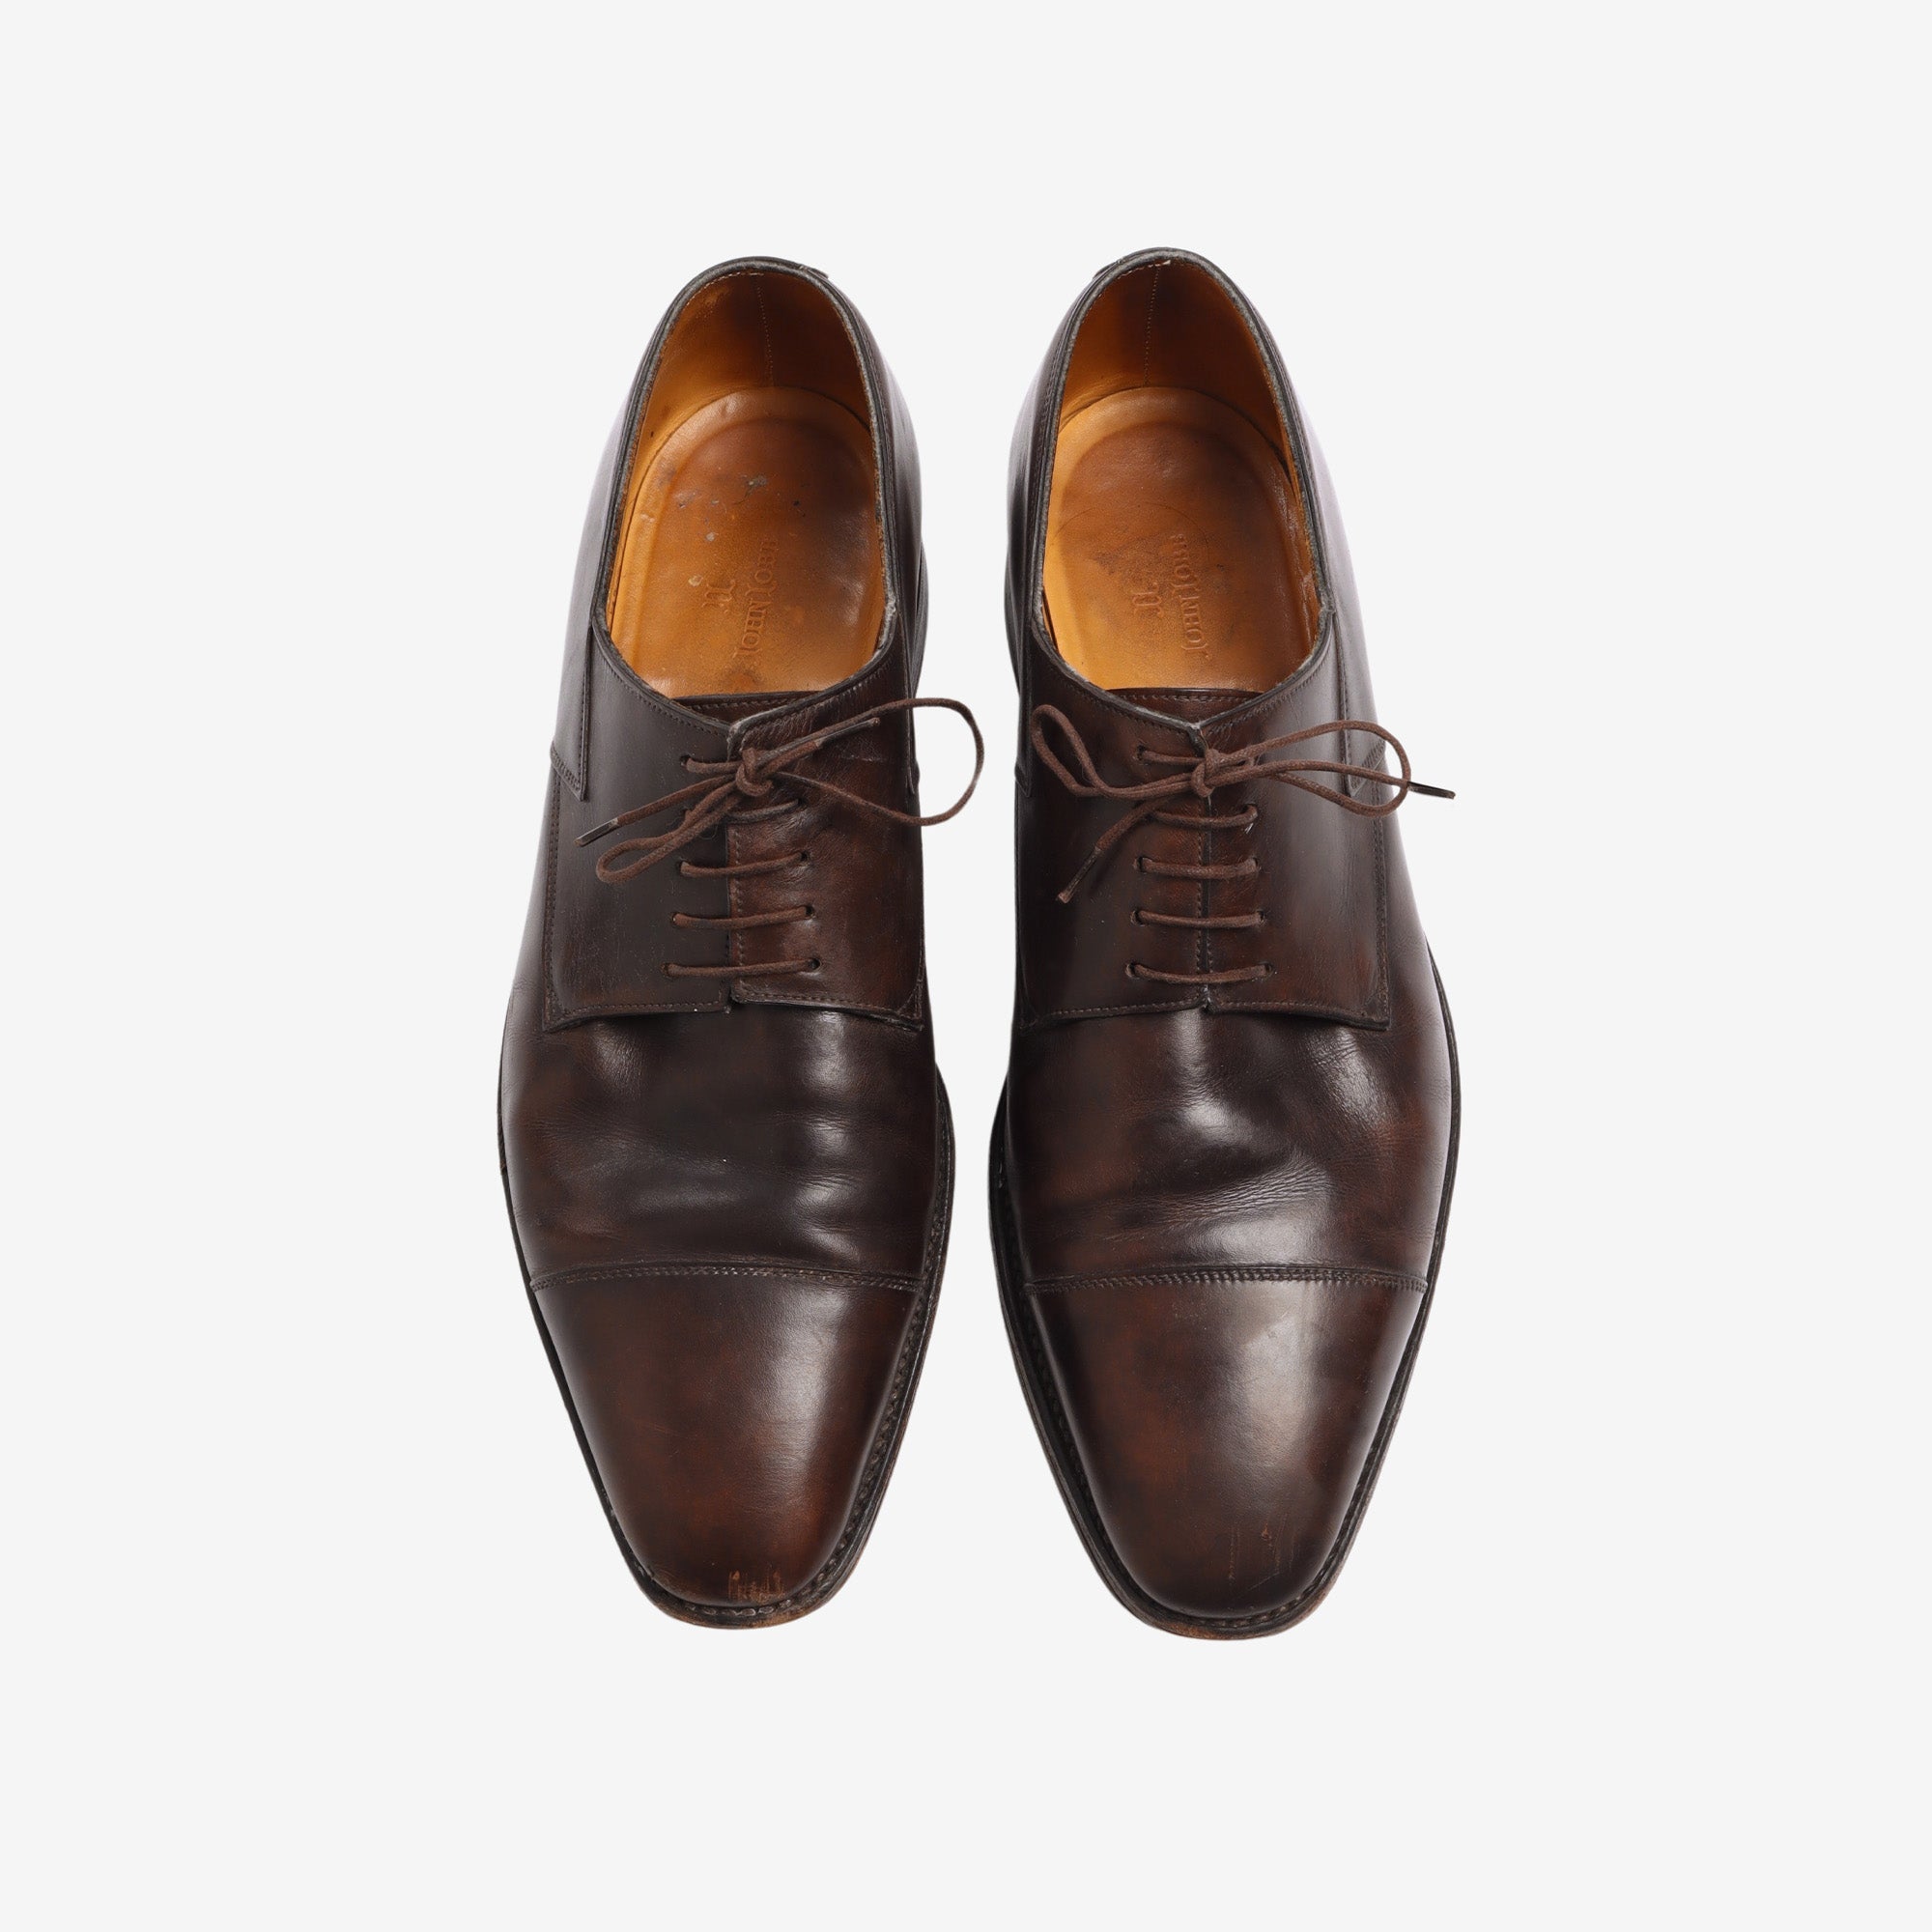 Brook Oxford Shoes